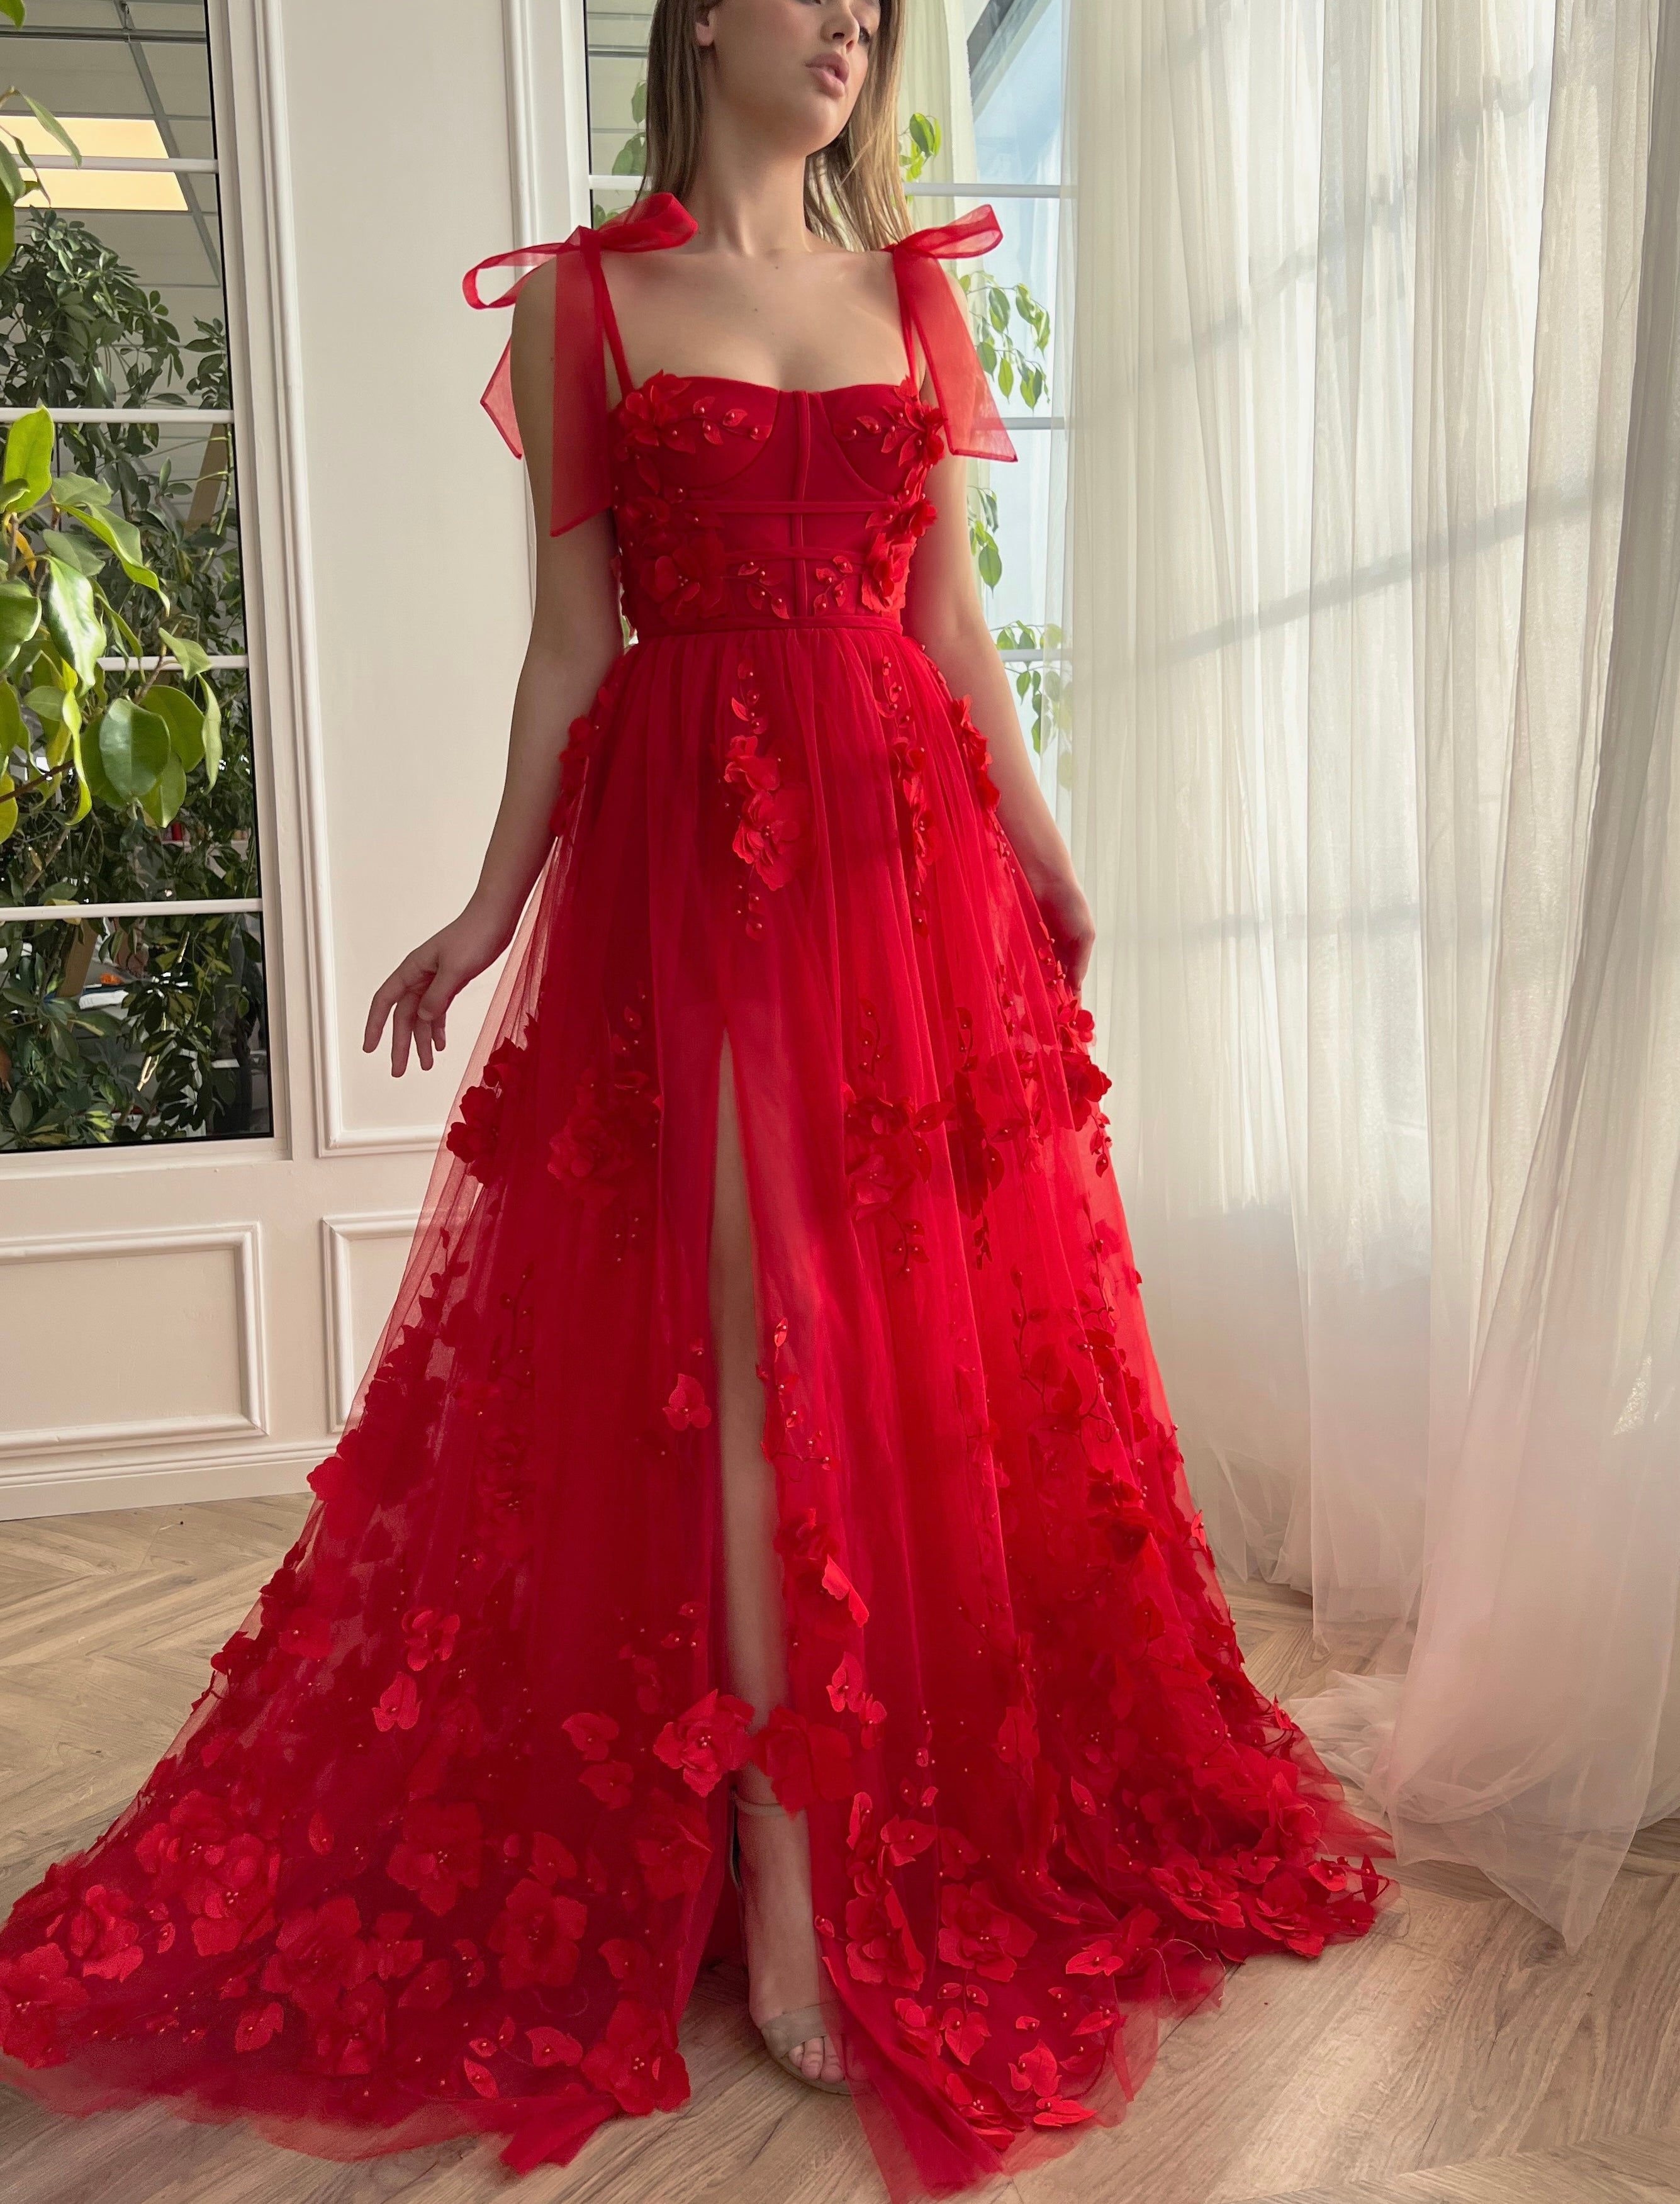 Red A-Line dress with embroidery and bow straps